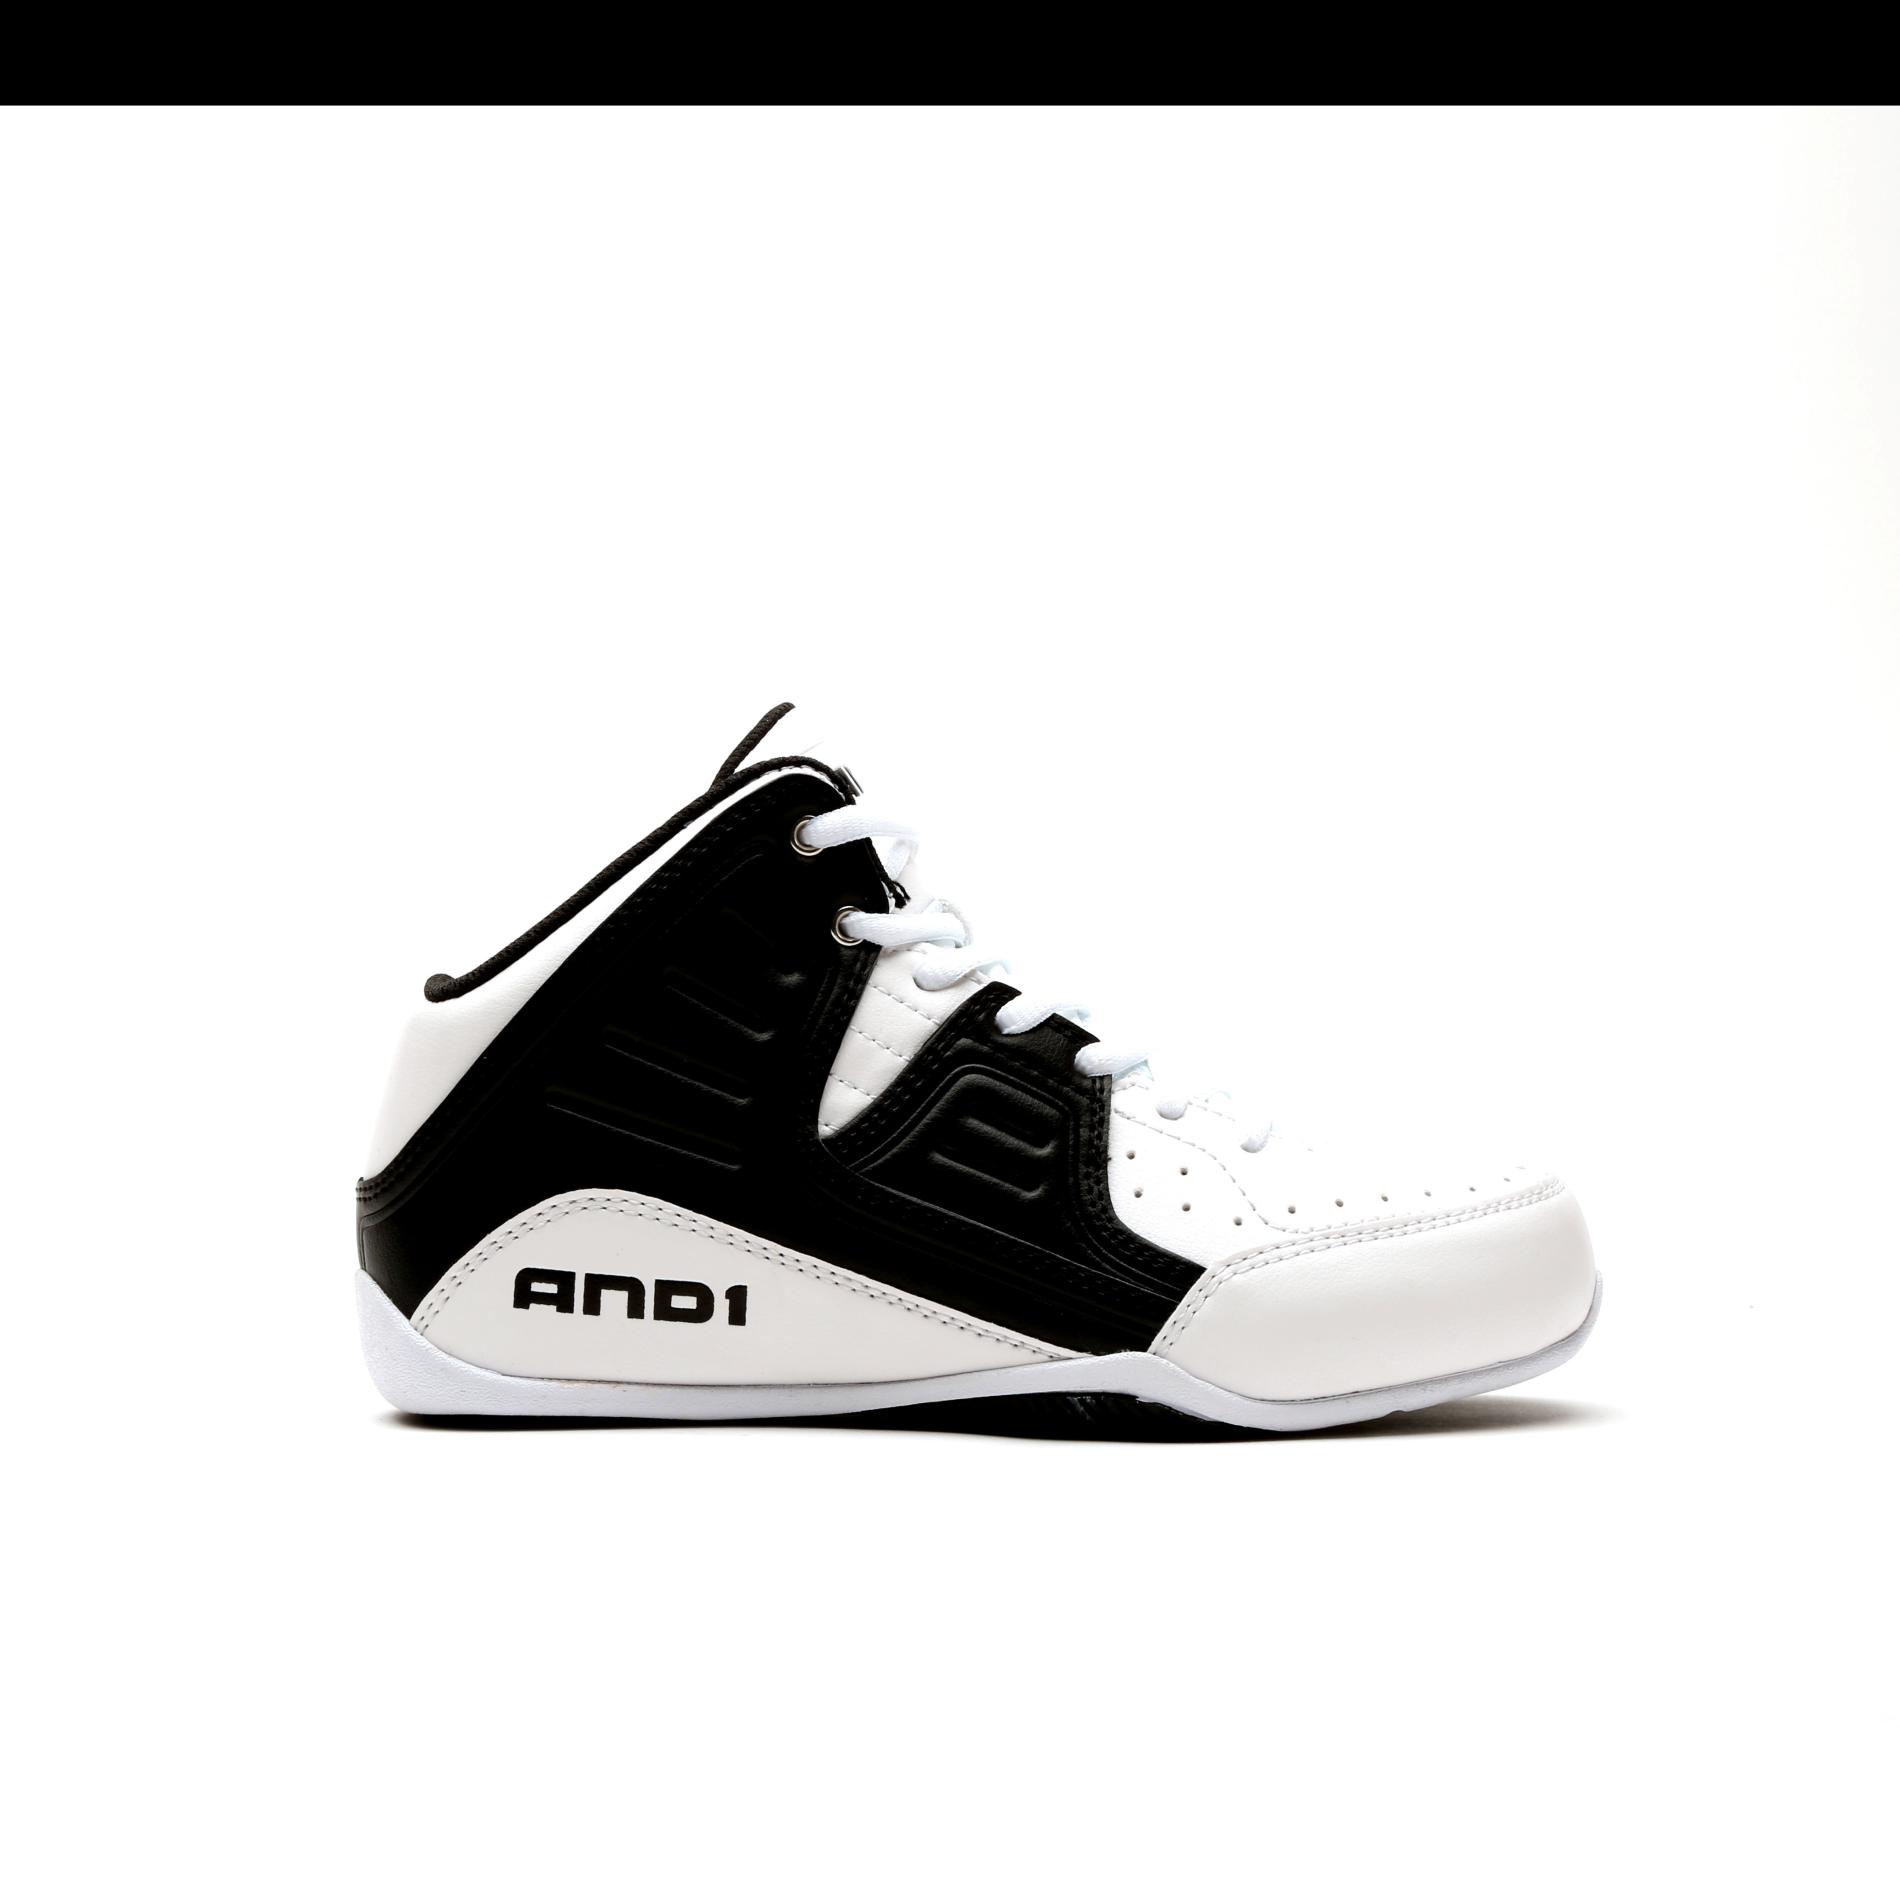 AND 1 Boy's Rocket 4 Black/White High-Top Athletic Shoe